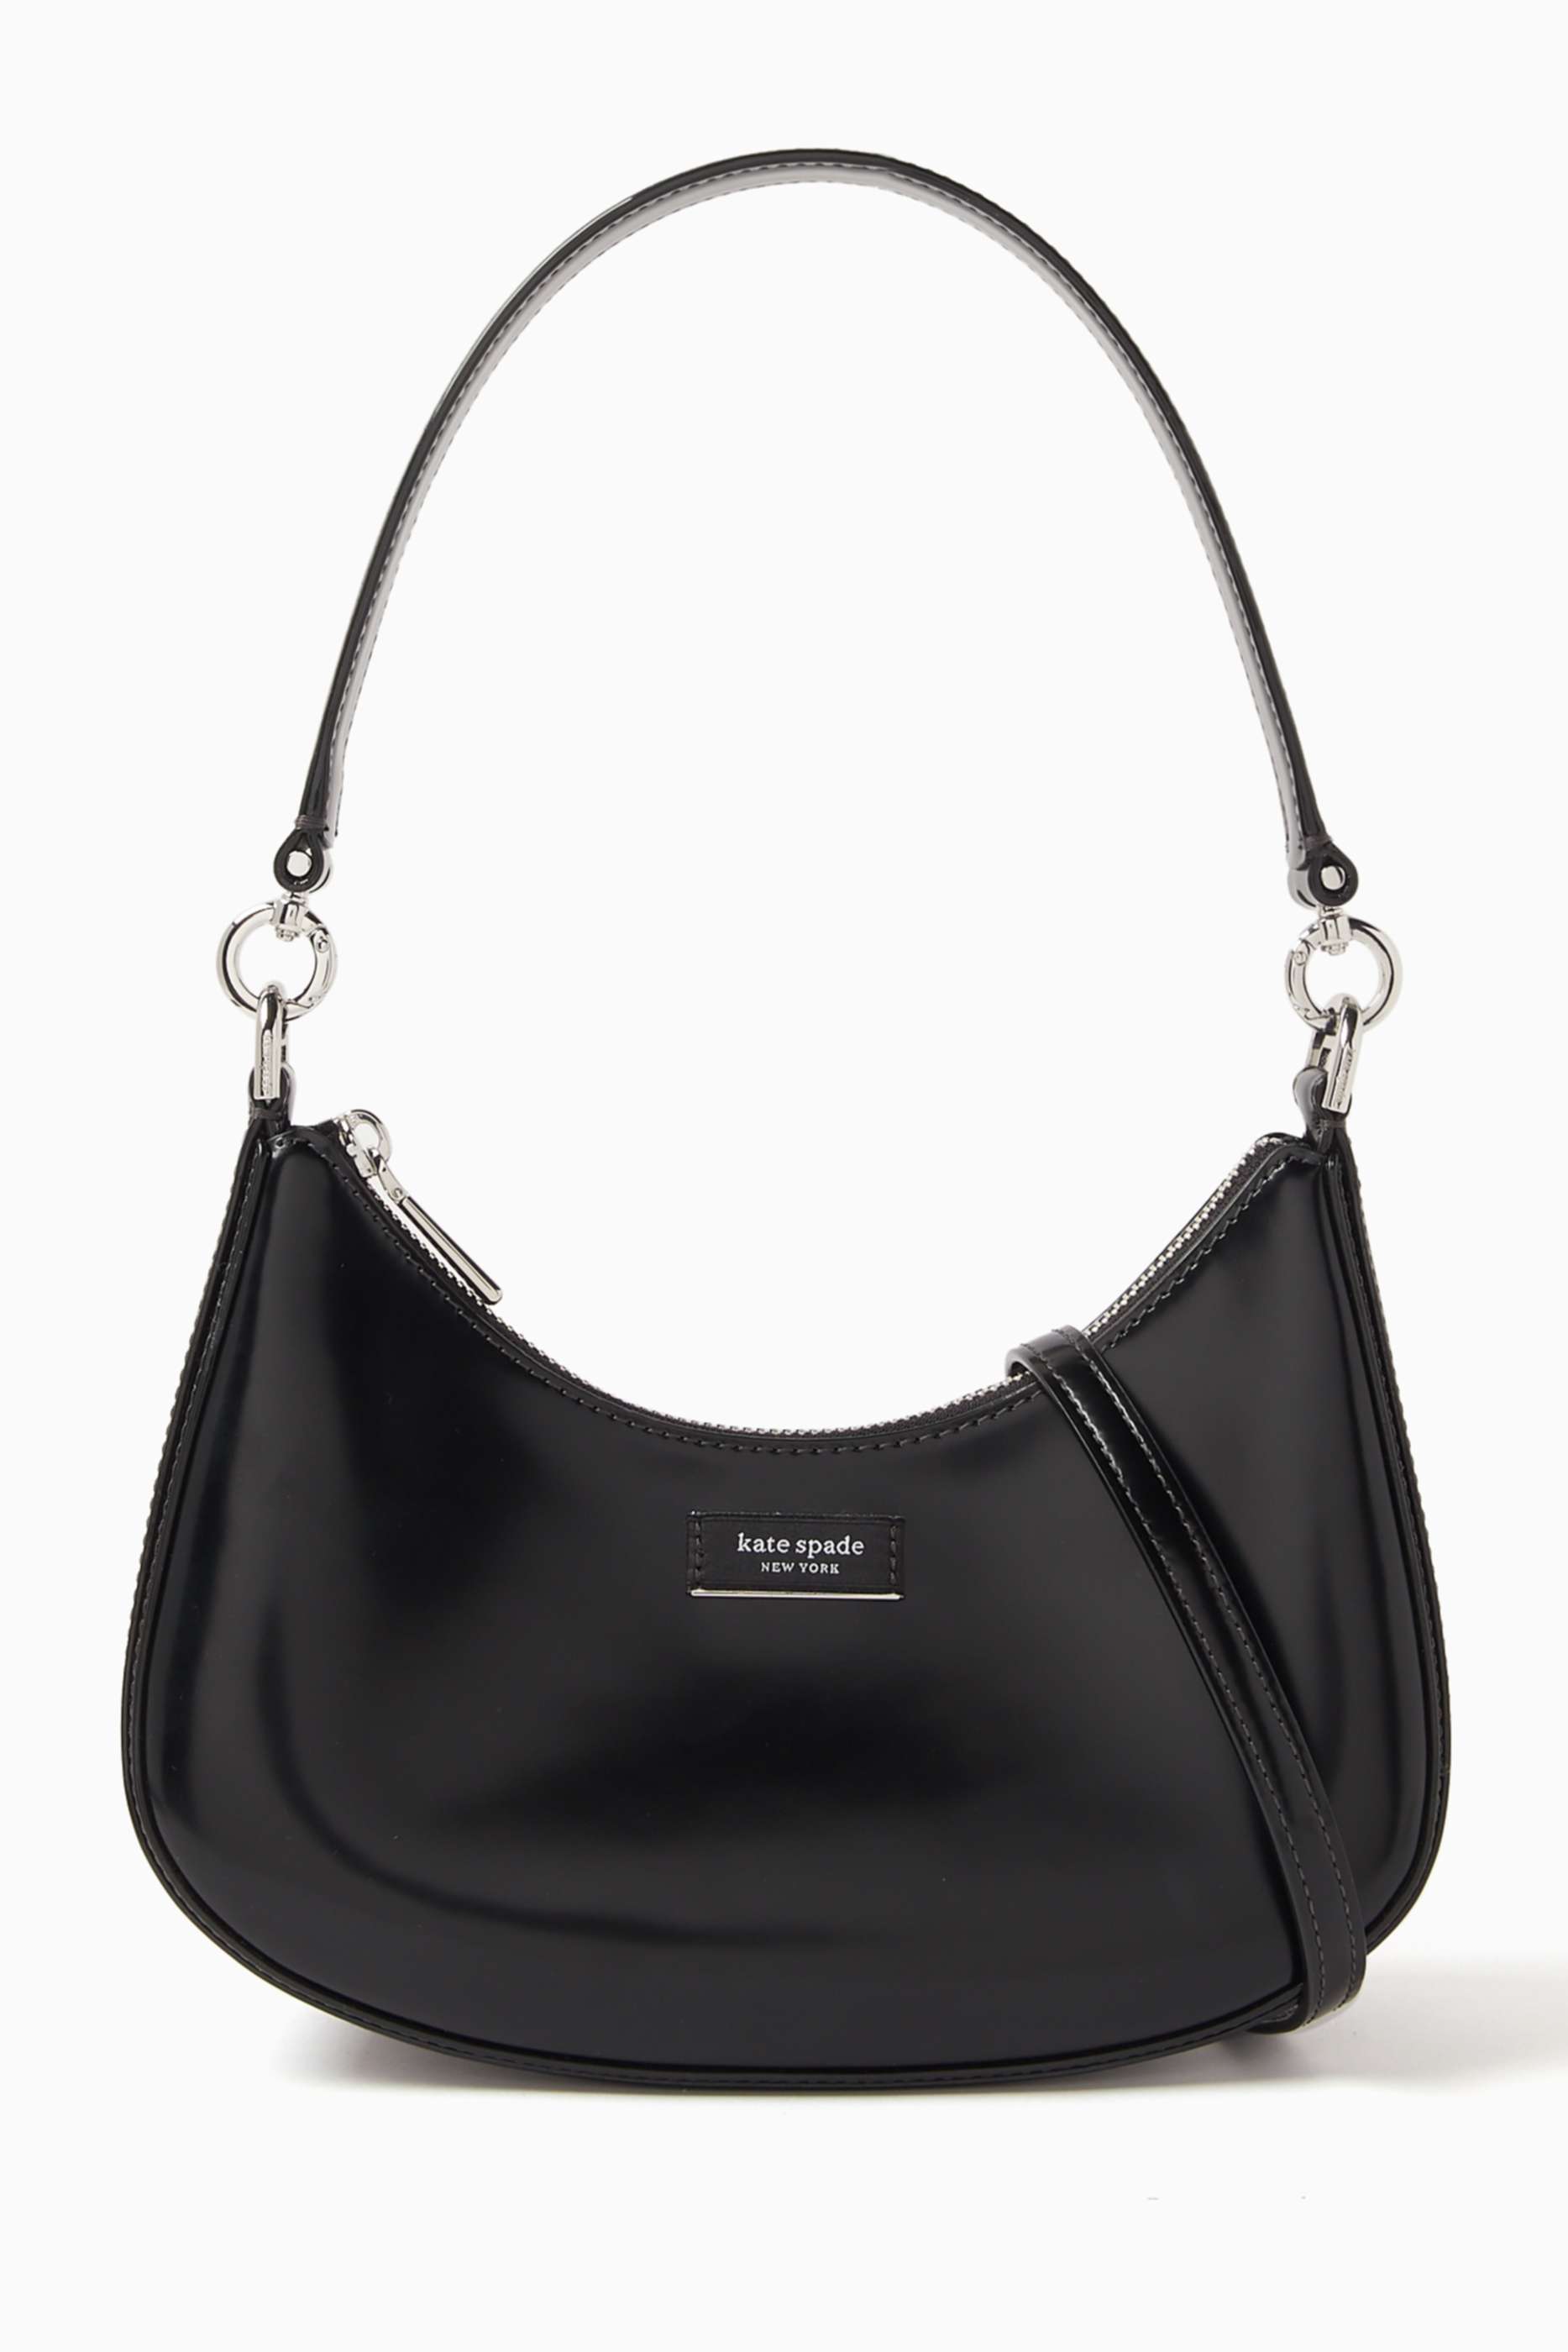 shop-kate-spade-new-york-small-sam-icon-convertible-bag-in-spazzolato-leather-for-women